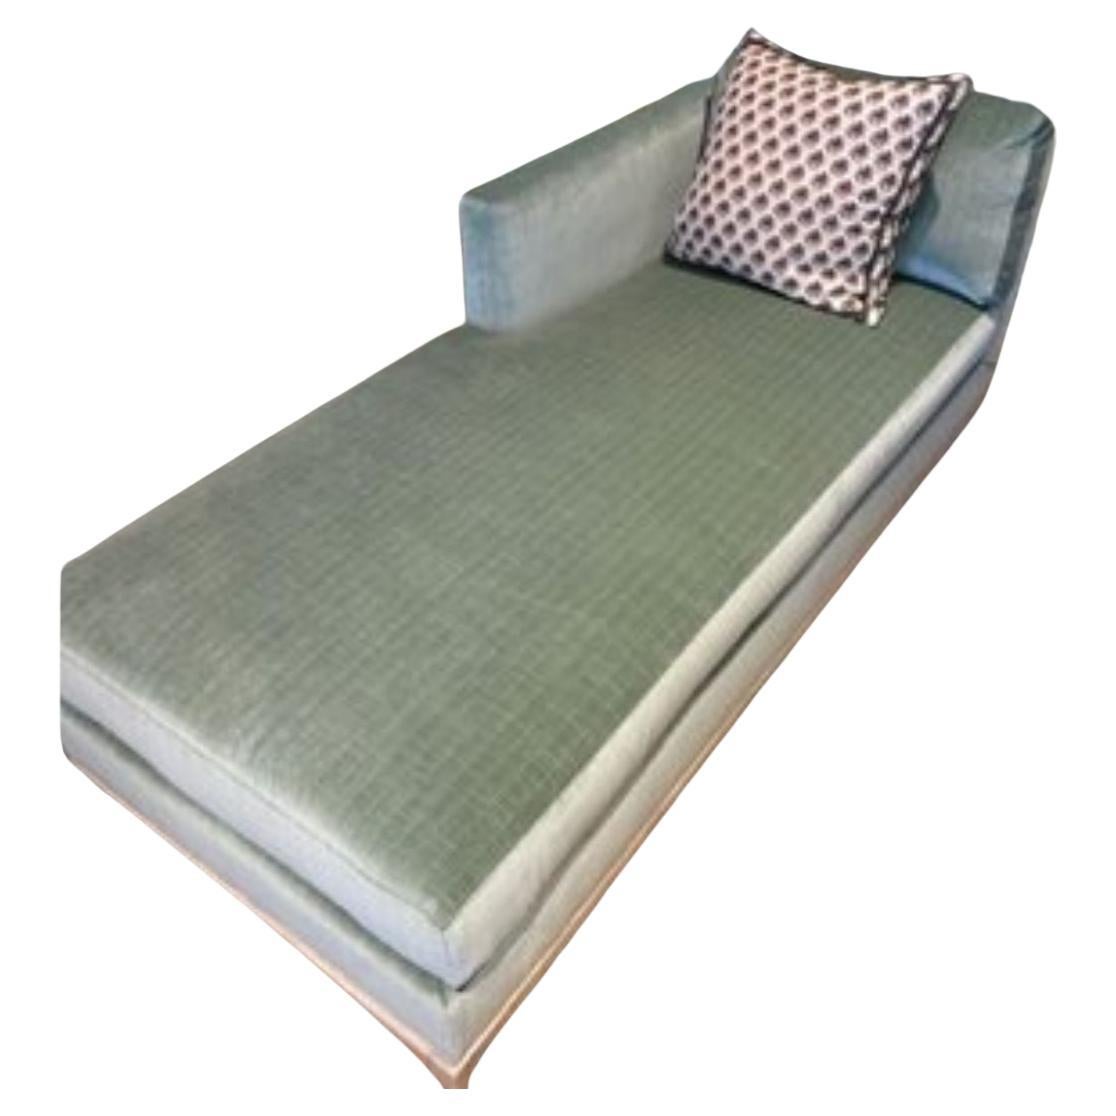 Chaise LAF upholstered in Sage Green, W:30.5 in D:74 in H:32 in For Sale